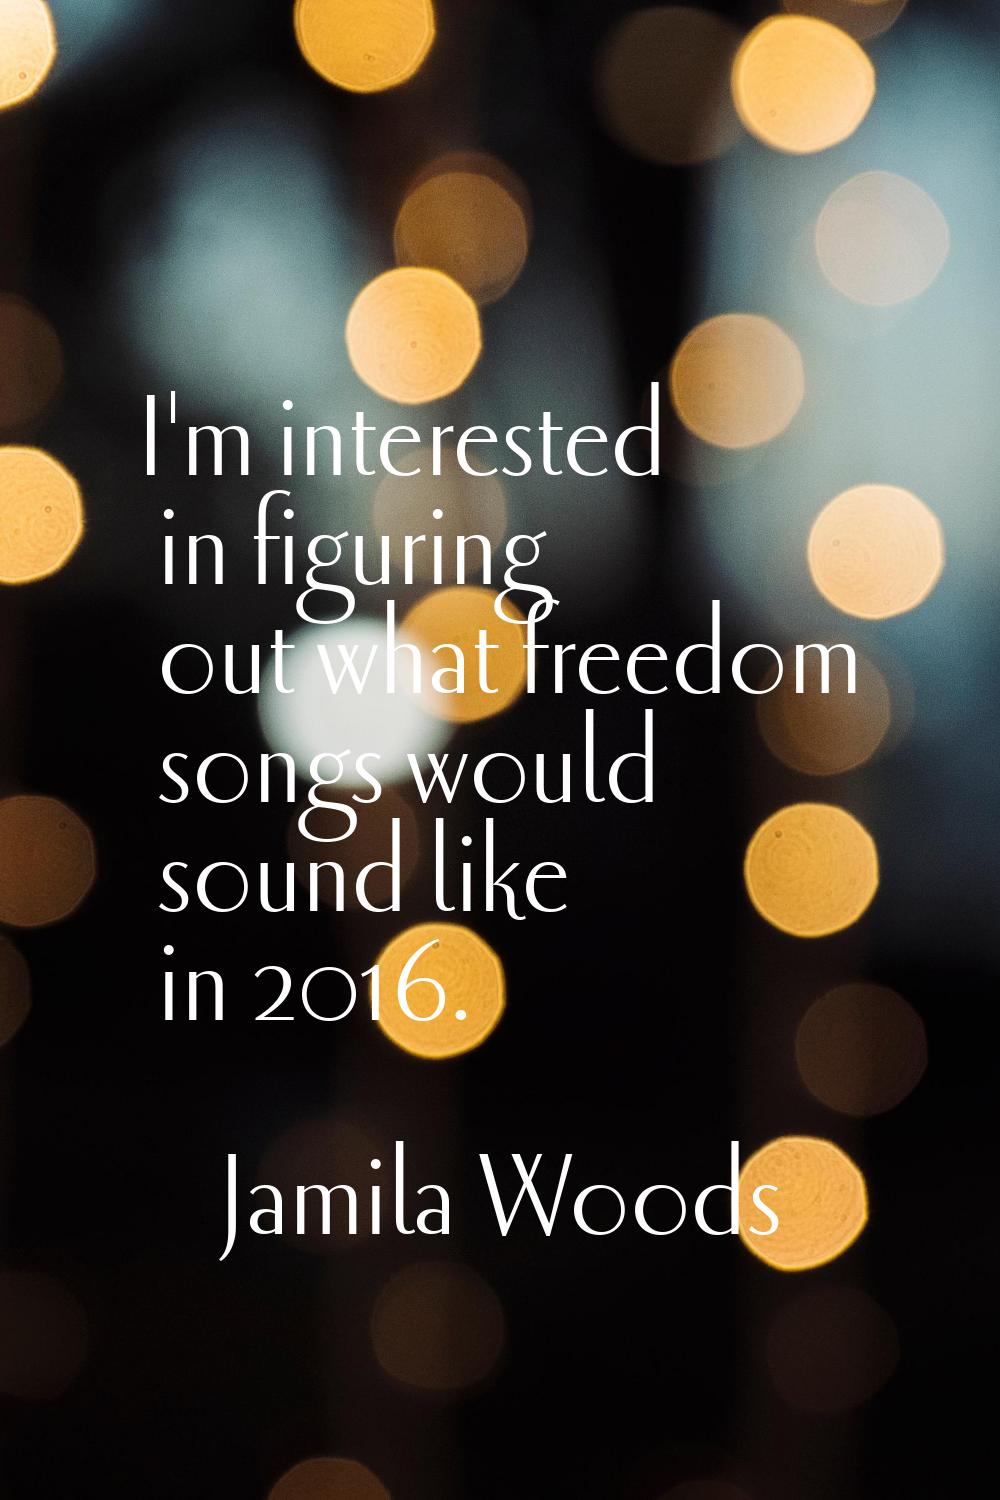 I'm interested in figuring out what freedom songs would sound like in 2016.